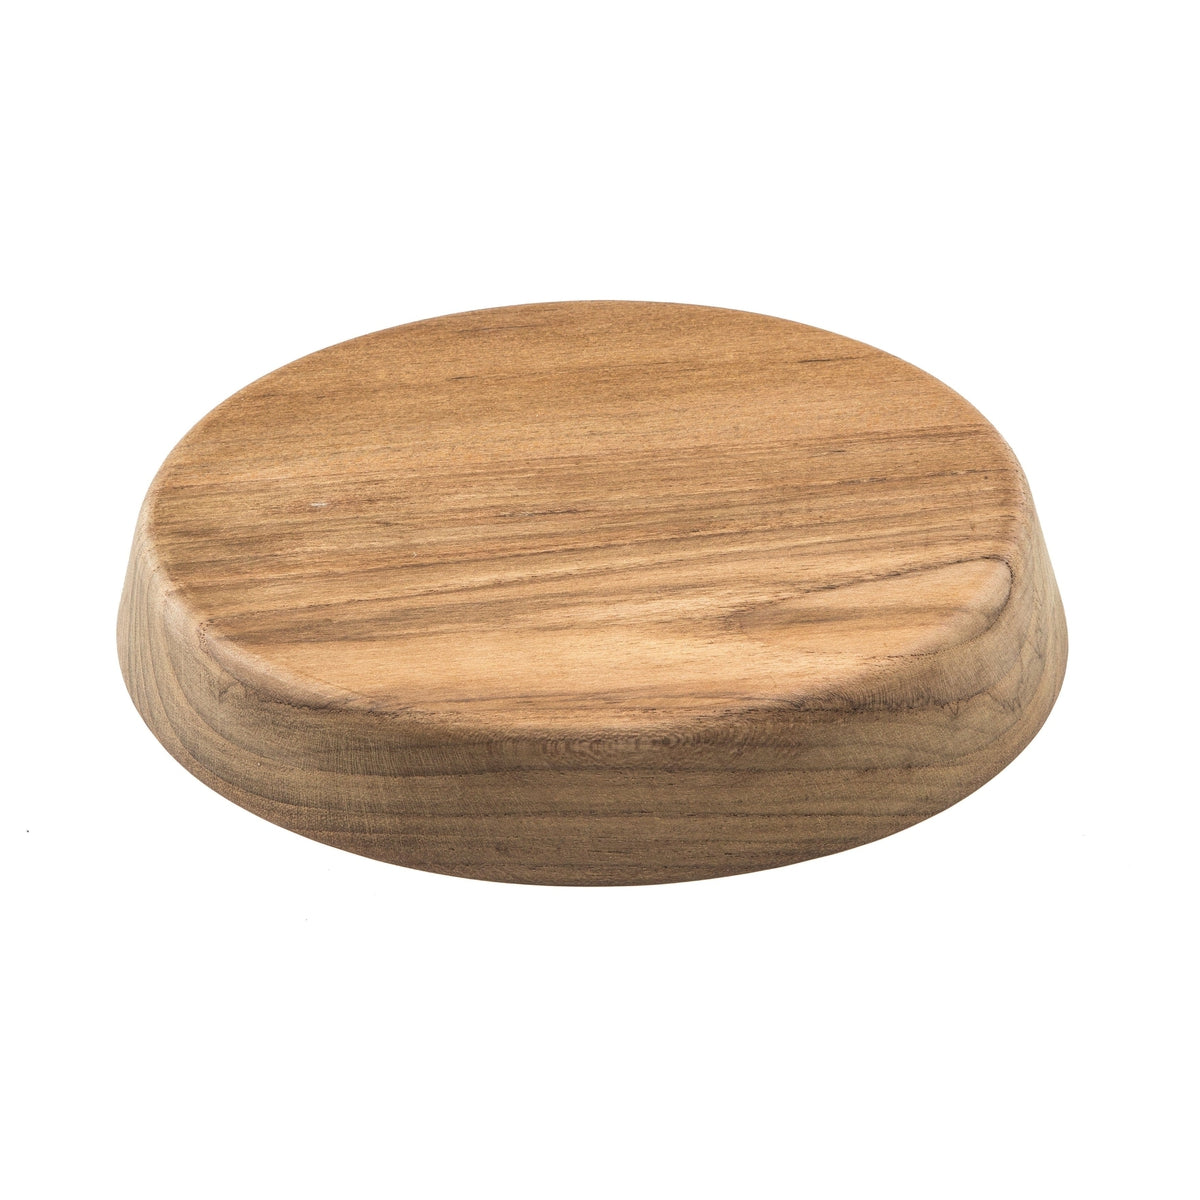 Whitecap Qualifies for Free Shipping Whitecap Canted Teak Winch Pad 7-3/4" Top Diameter 15-Degree Angle #60169